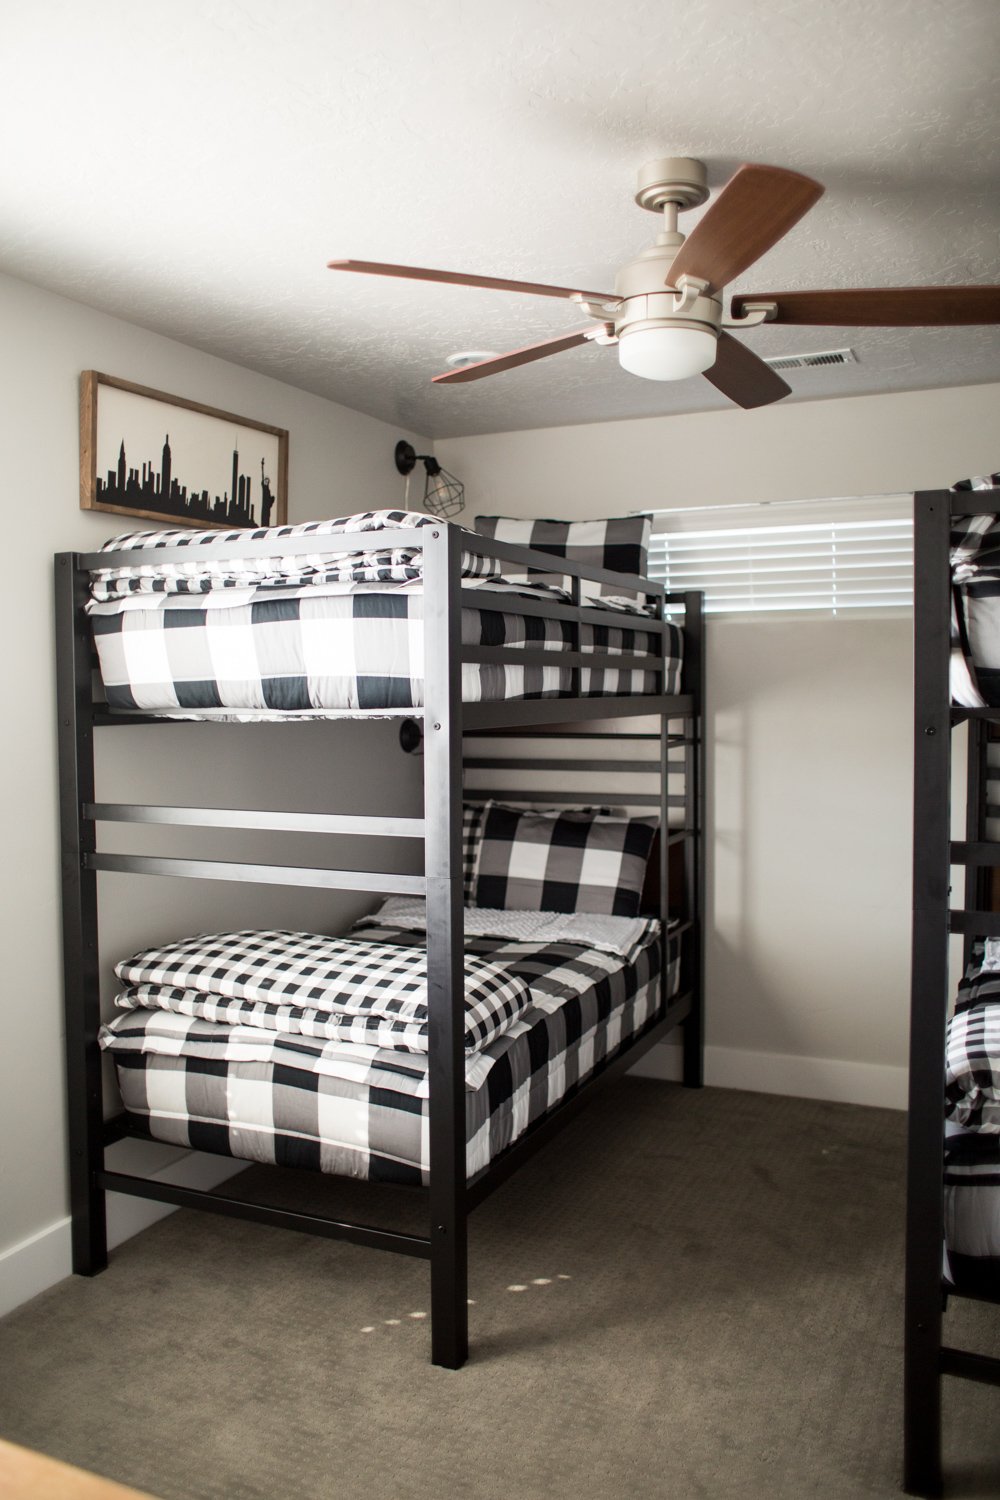 How To Make A Bunkbed In Less Than 5, Bunk Bed Ceiling Fan